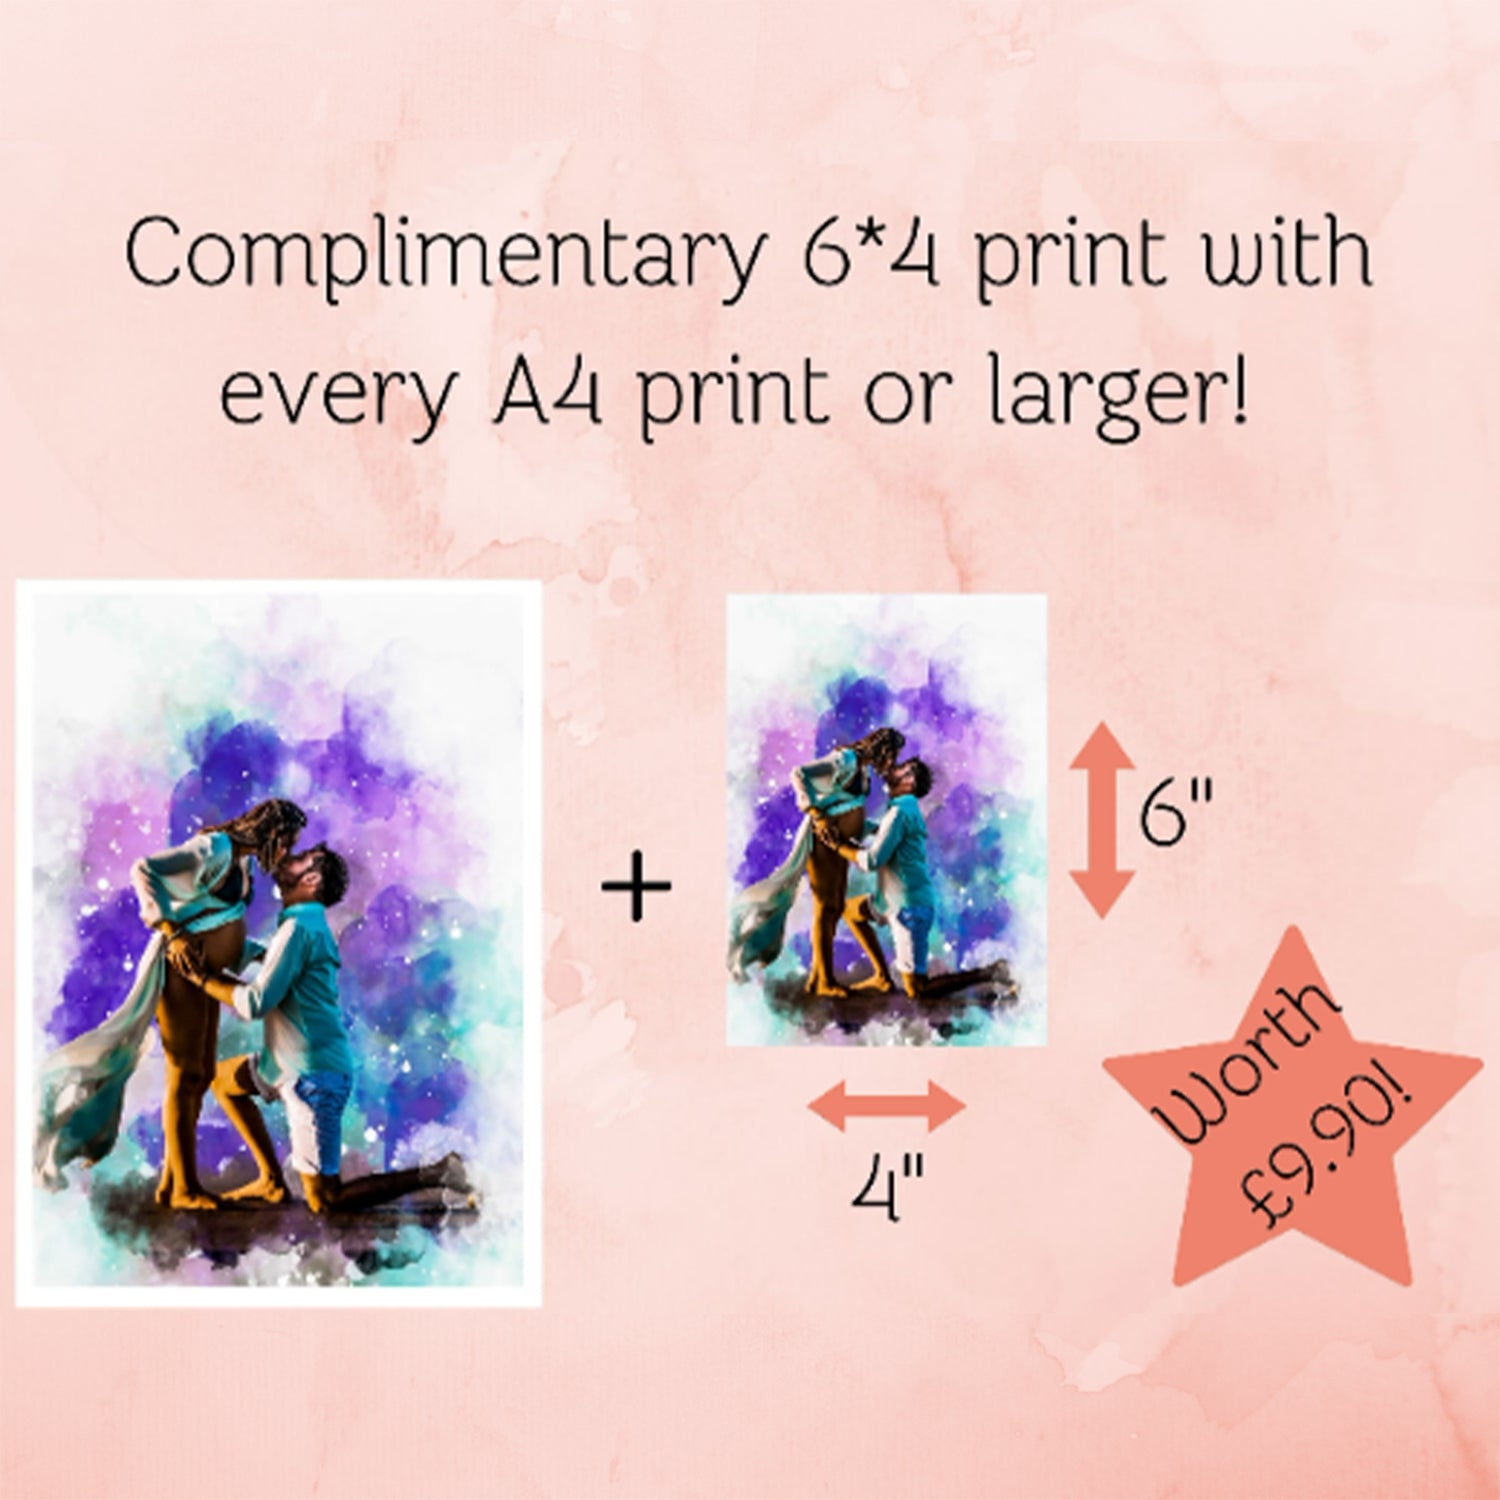 Personalised Watercolour Couple Painting, Custom Wedding Portrait From Photo Gift